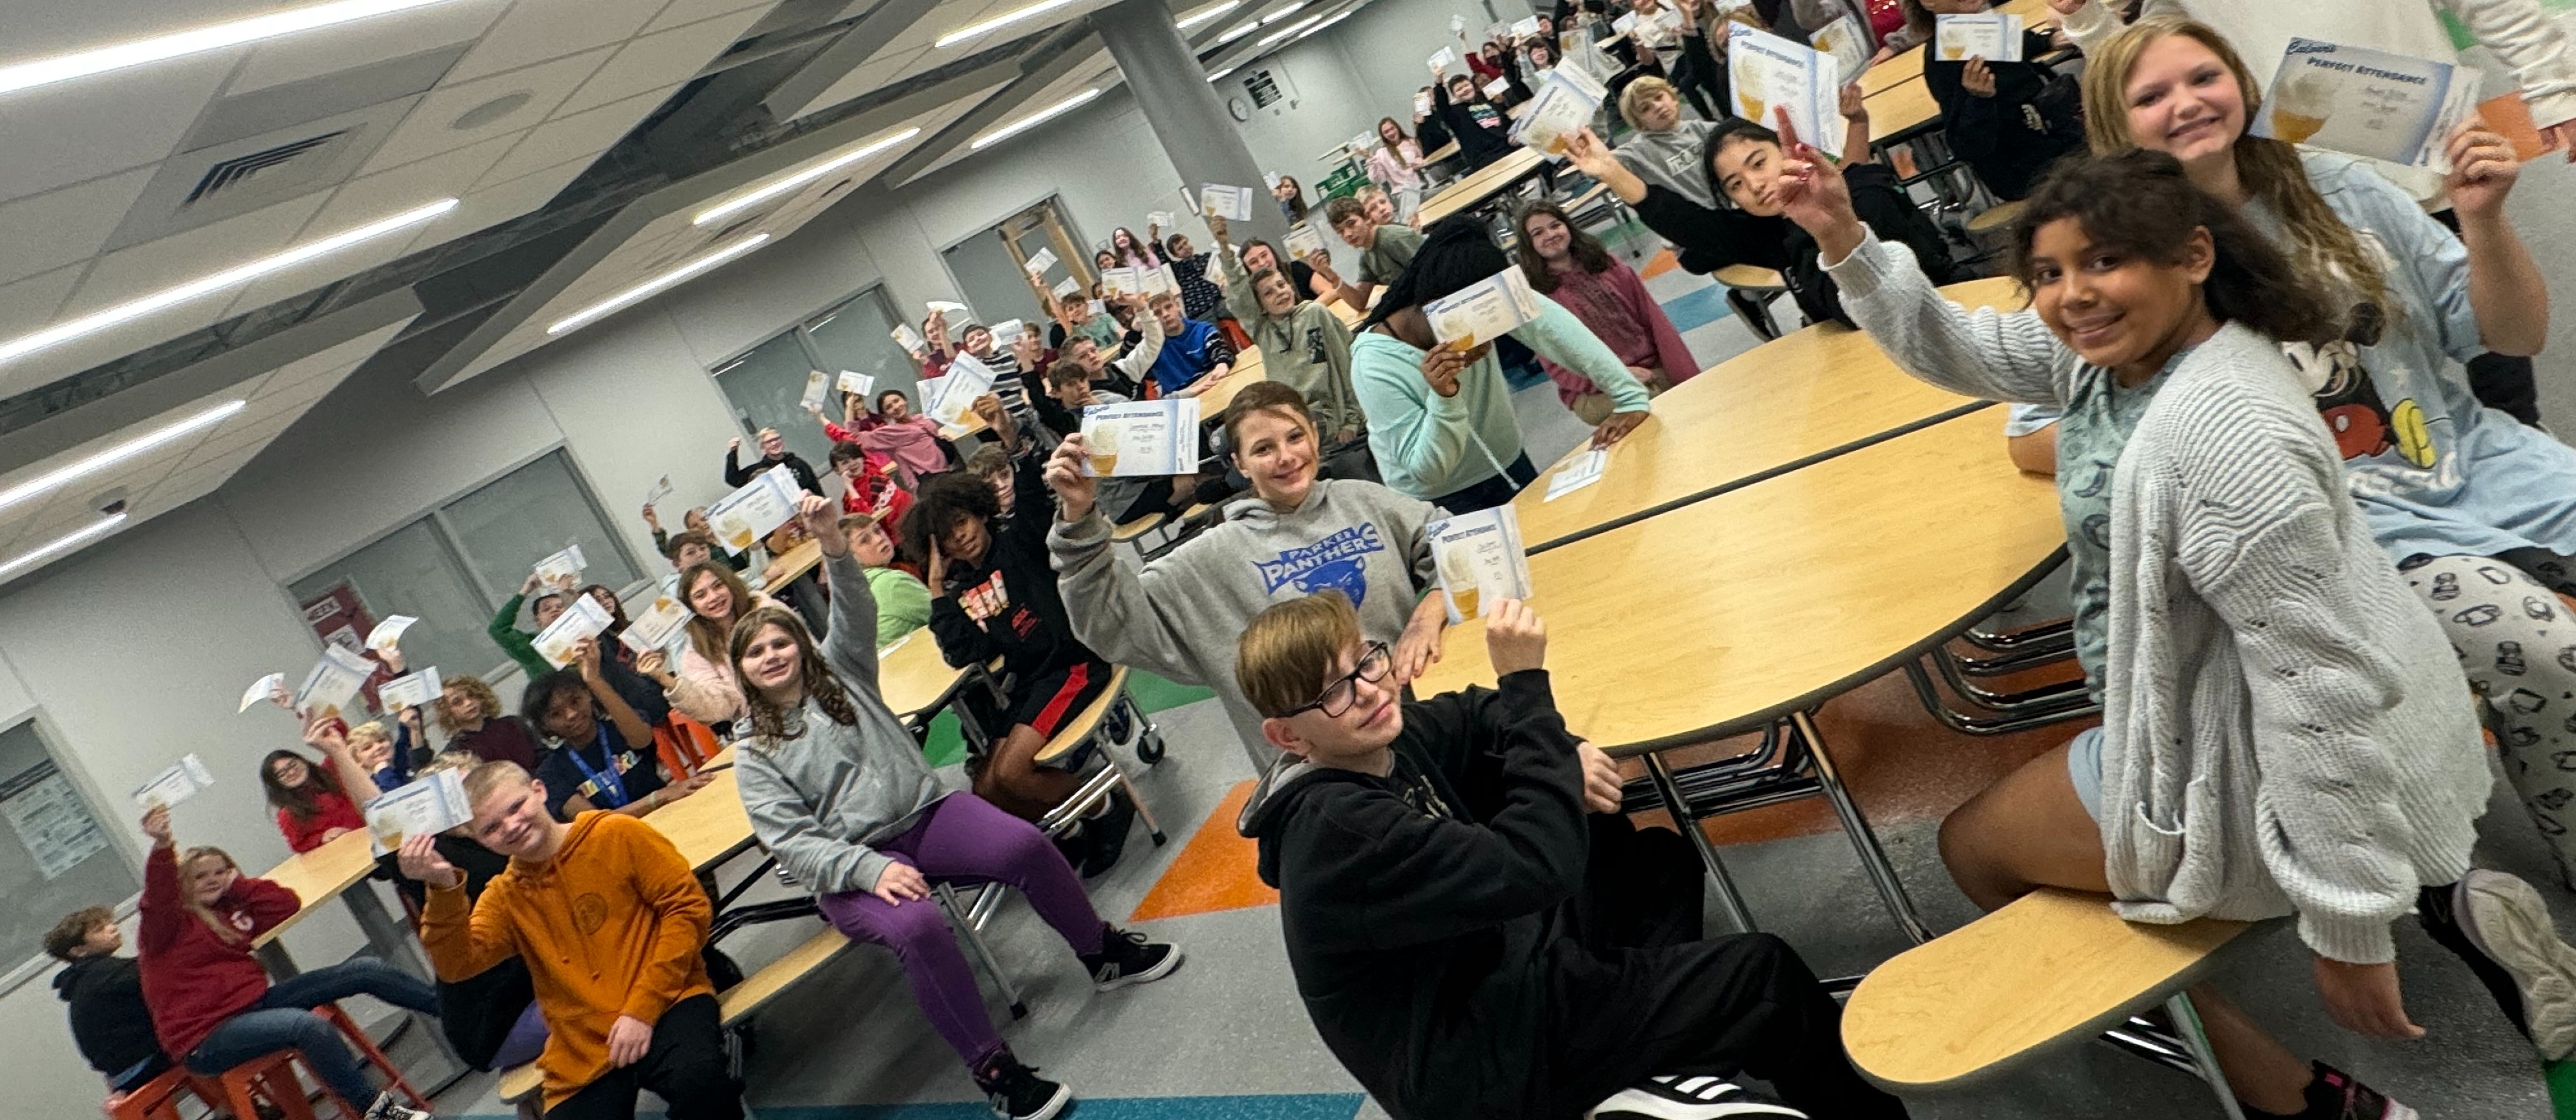 Students hold up their attendance awards in the cafeteria